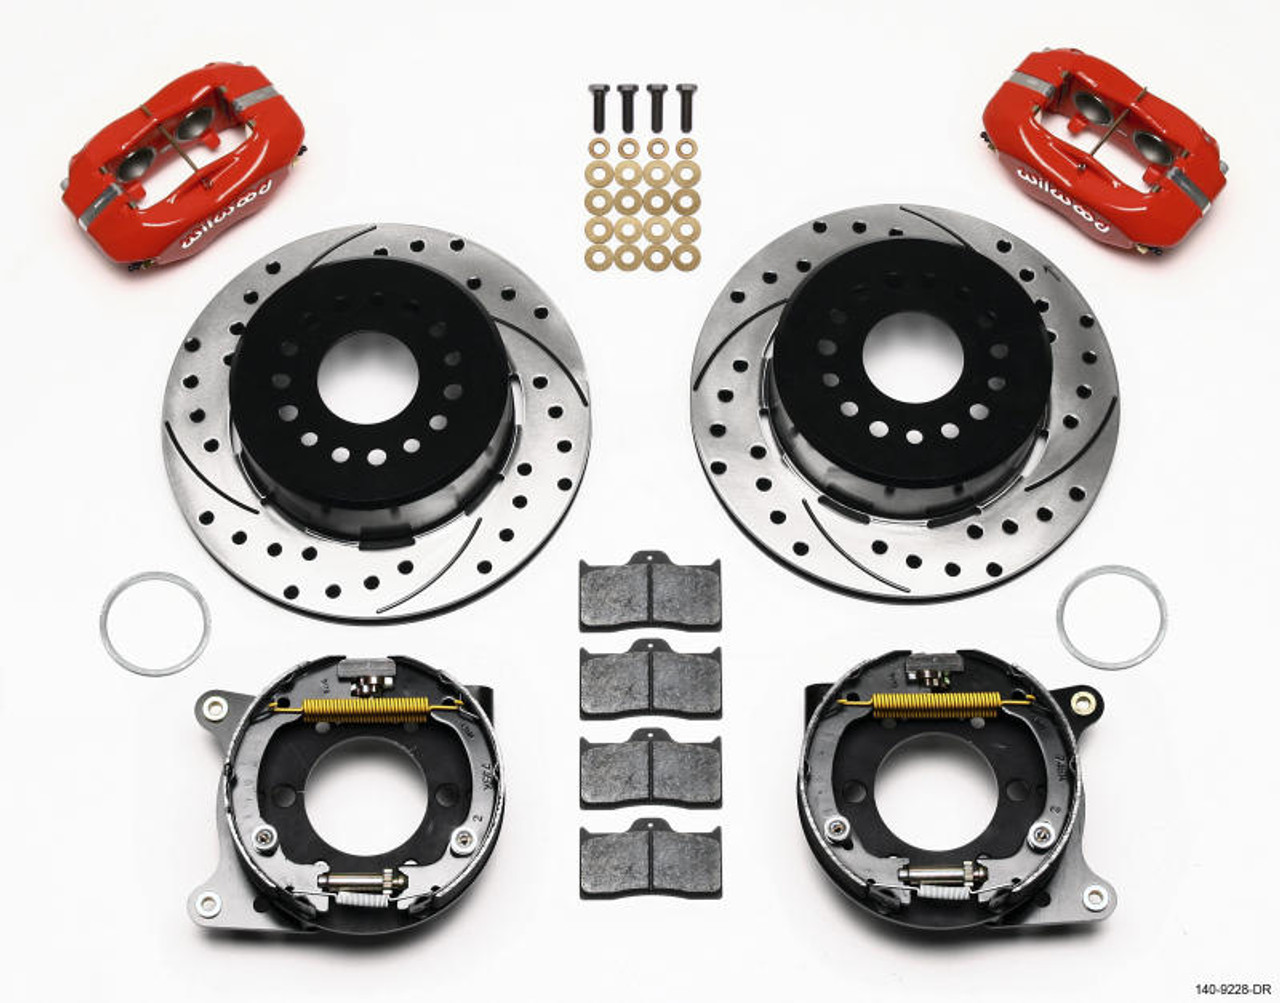 WilWood Wilwood Forged Dynalite P/S P-B Kit Drilled-Red 2005-2014 Mustang - 140-9228-DR